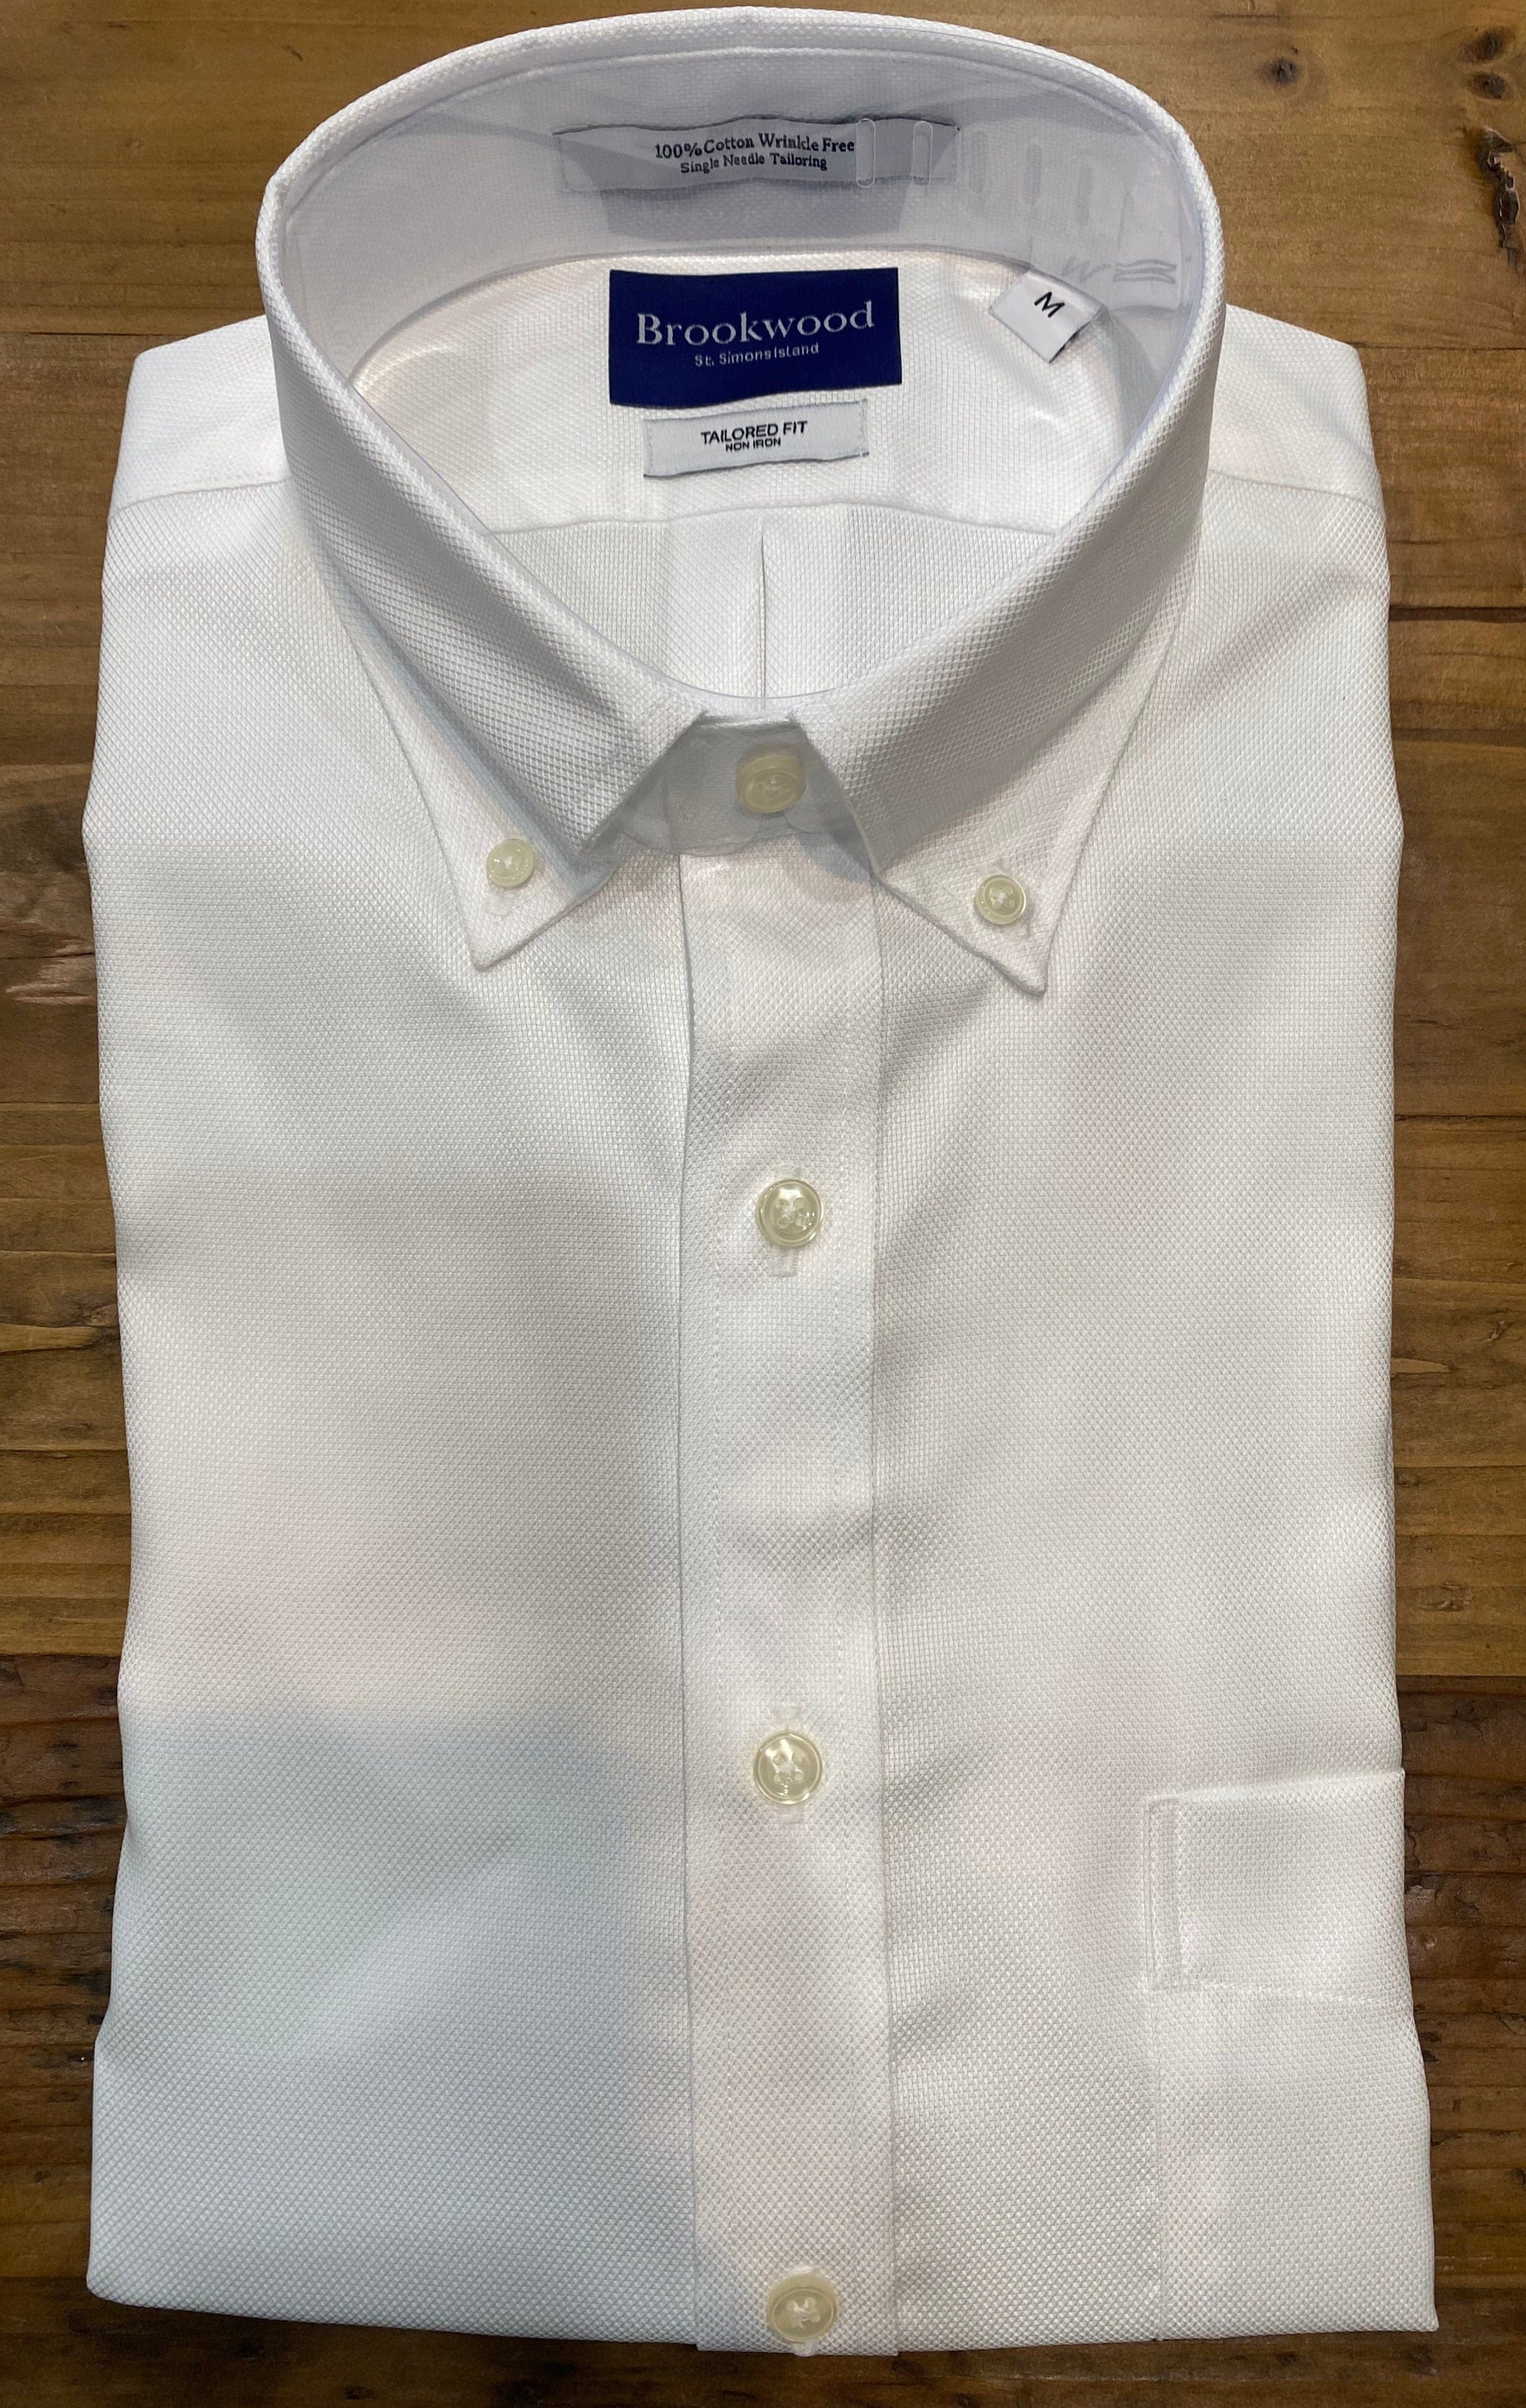 Brookwood Men's Shirts Brookwood - Tailored Fit White Oxford Shirt